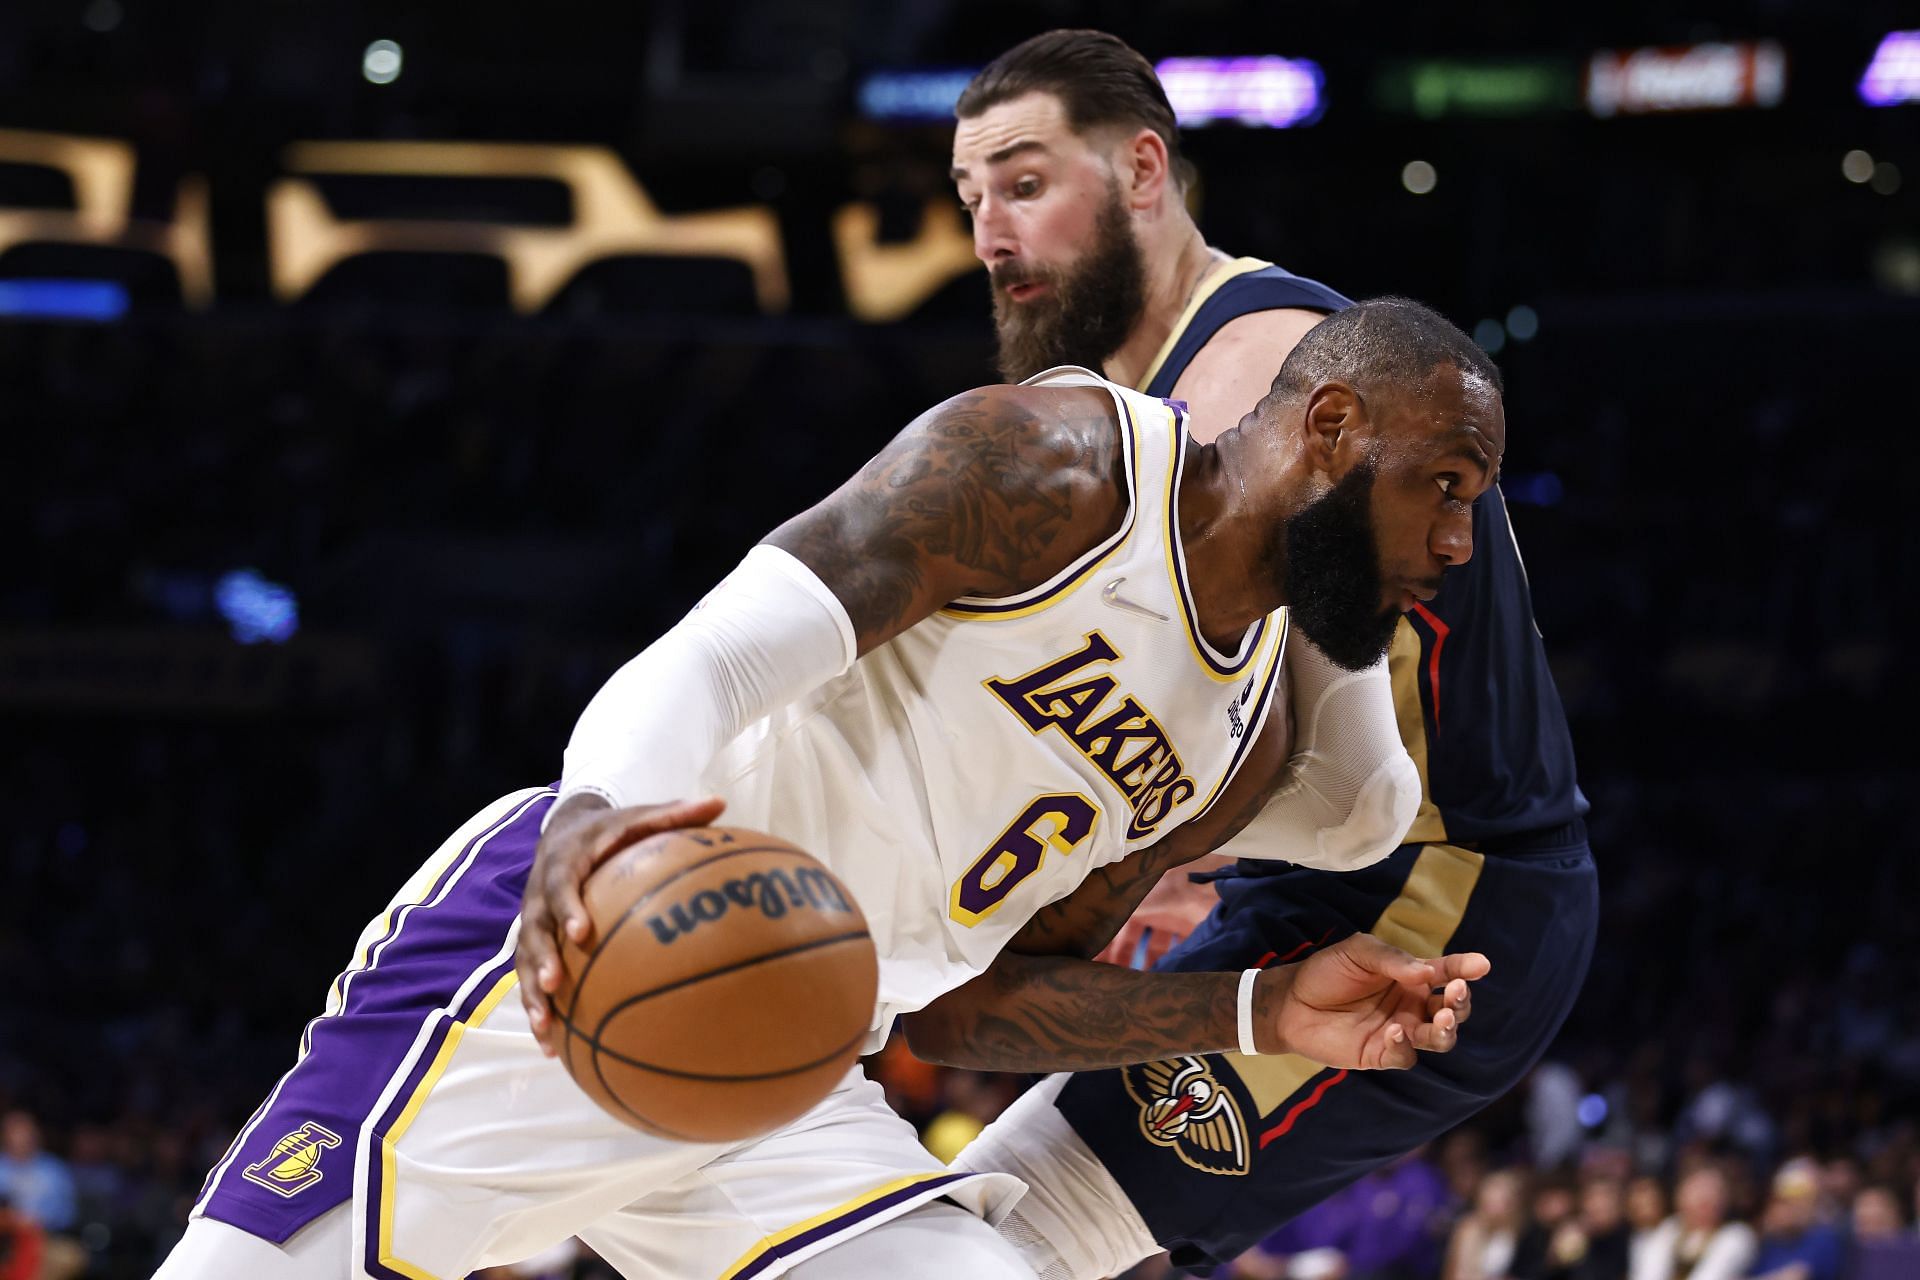 LeBron James scored 32 points for the Los Angeles Lakers in their loss to the New Orleans Pelicans on Sunday